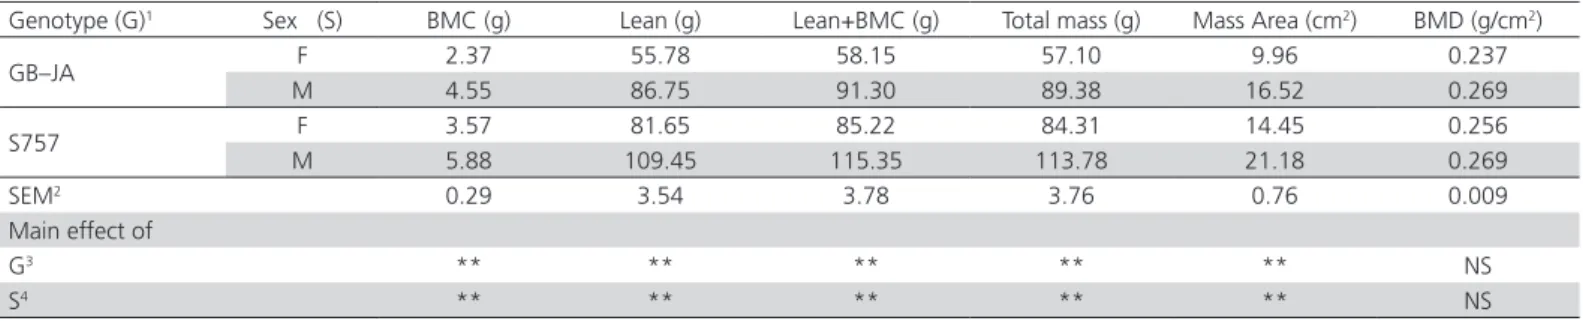 Table 4 shows the correlations between BW, giblets,  abdominal fat, BMC, and BMD values